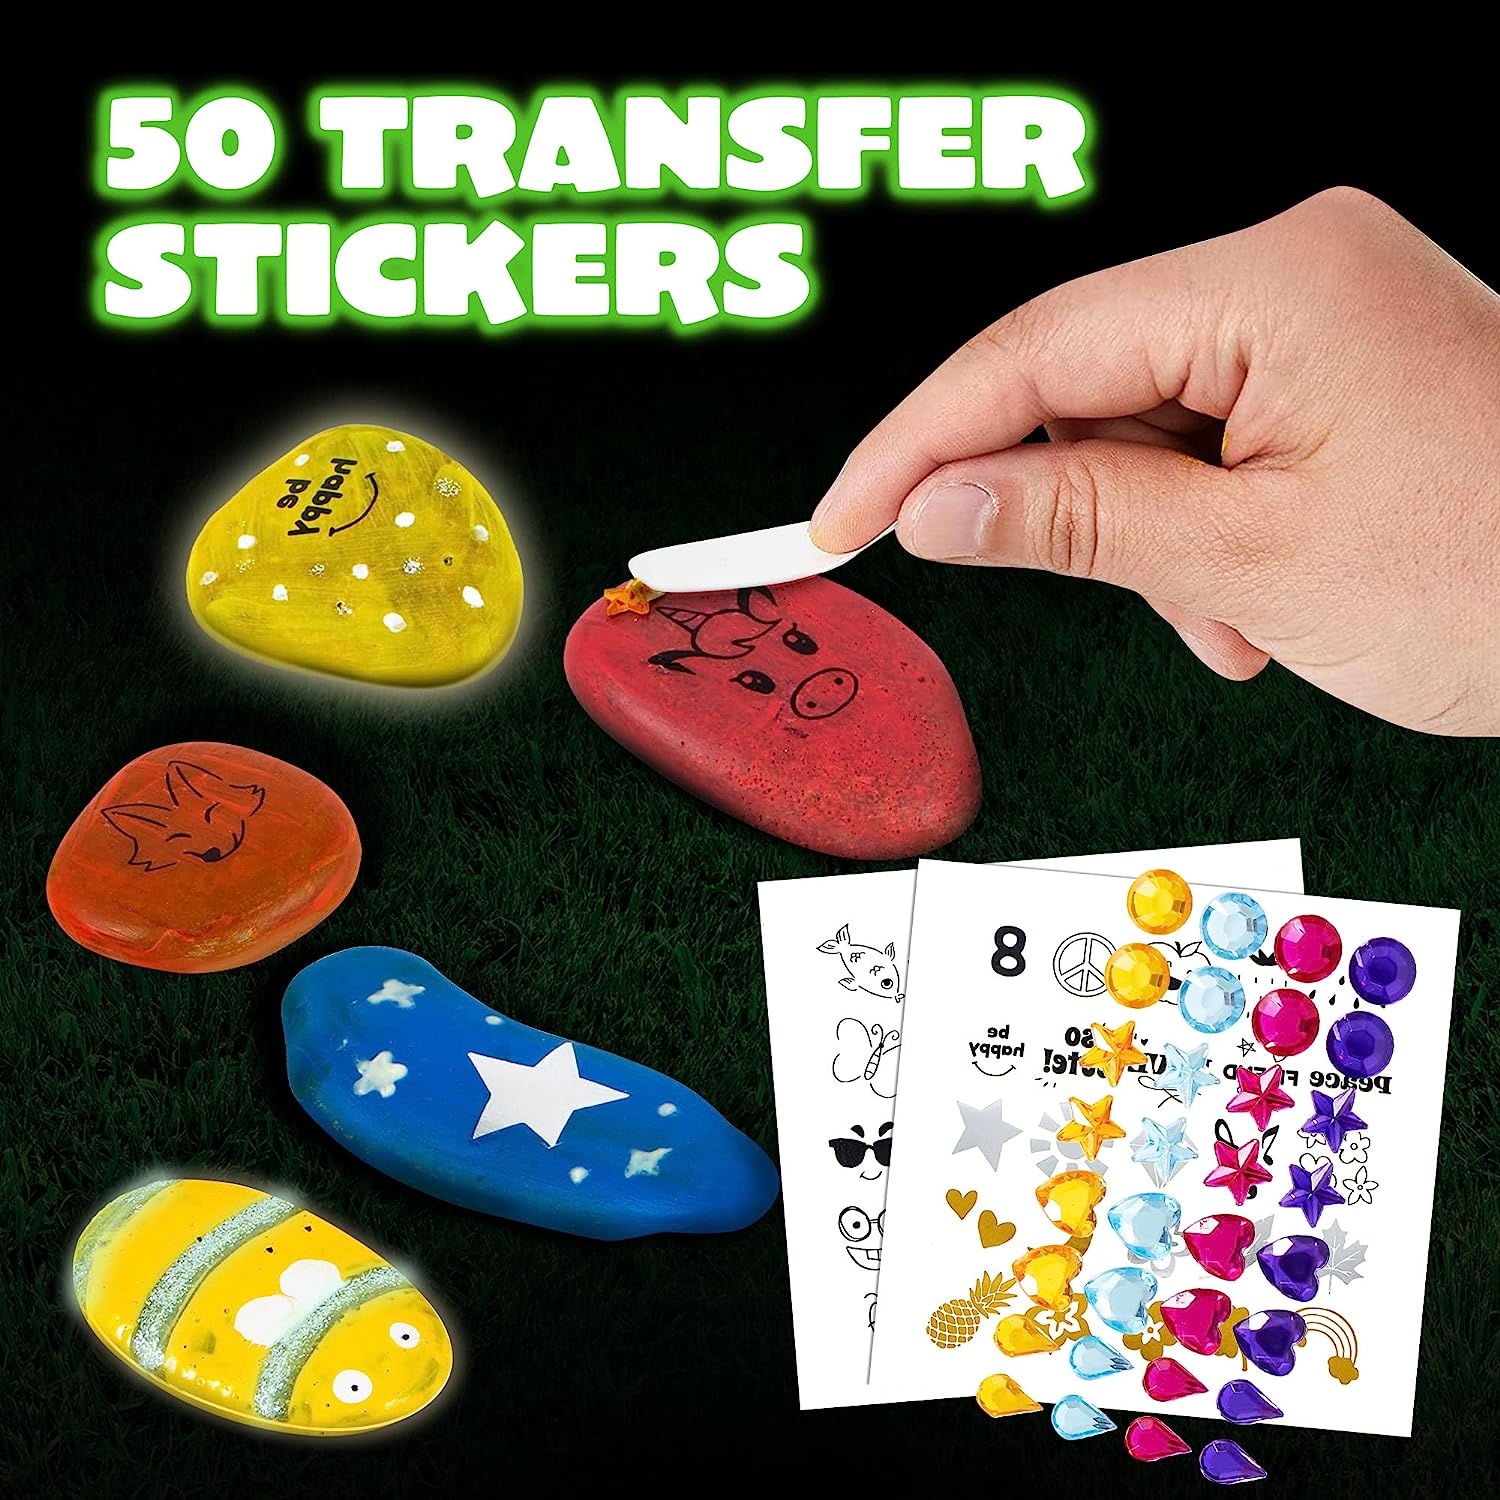 Transfer stickers are included with a glow in the dark rock painting kit for kids.